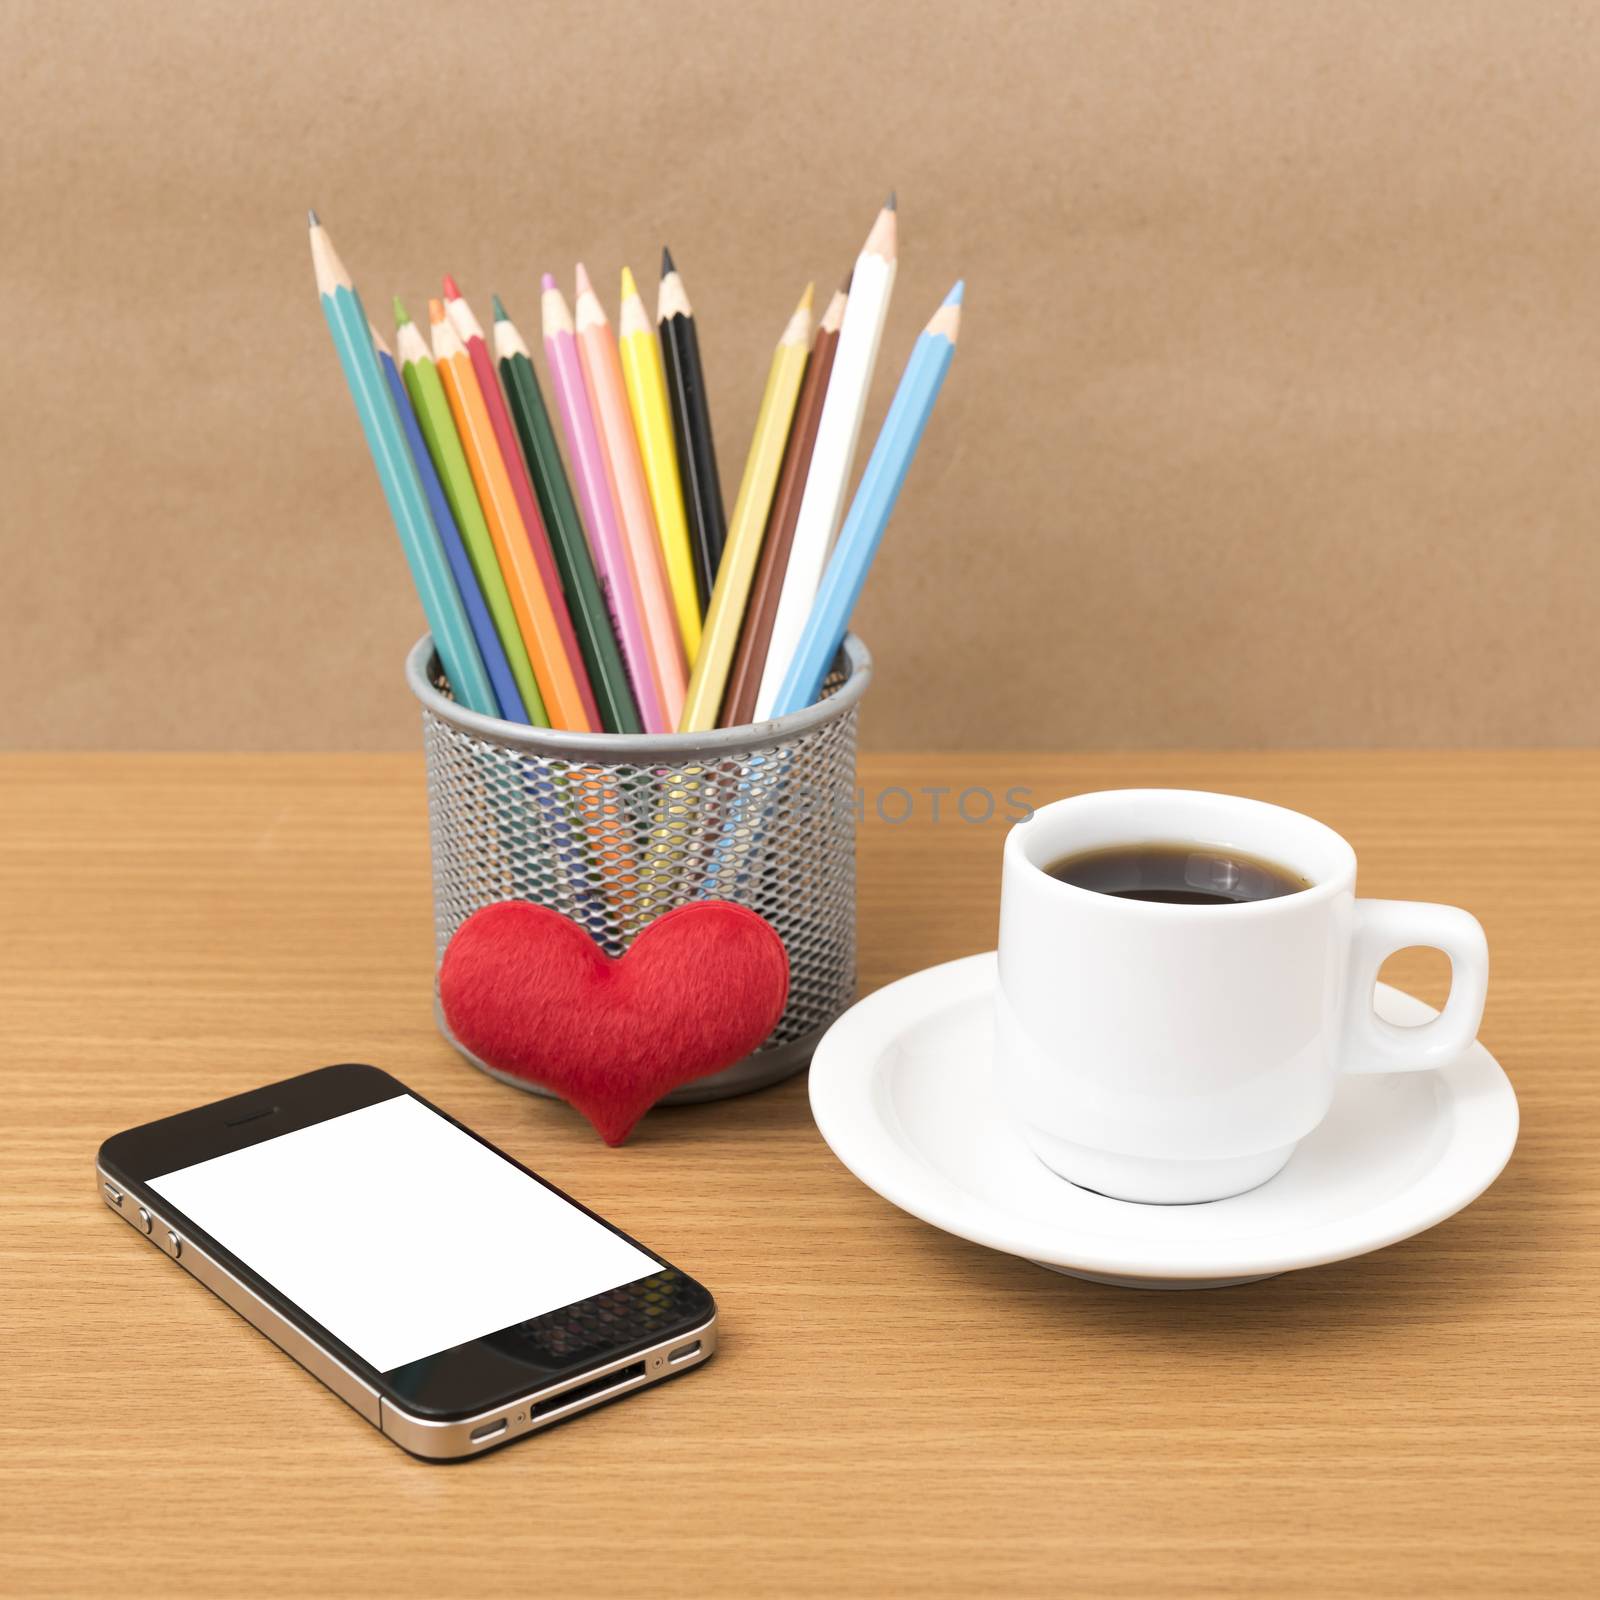 coffee,phone,color pencil and heart on wood table background